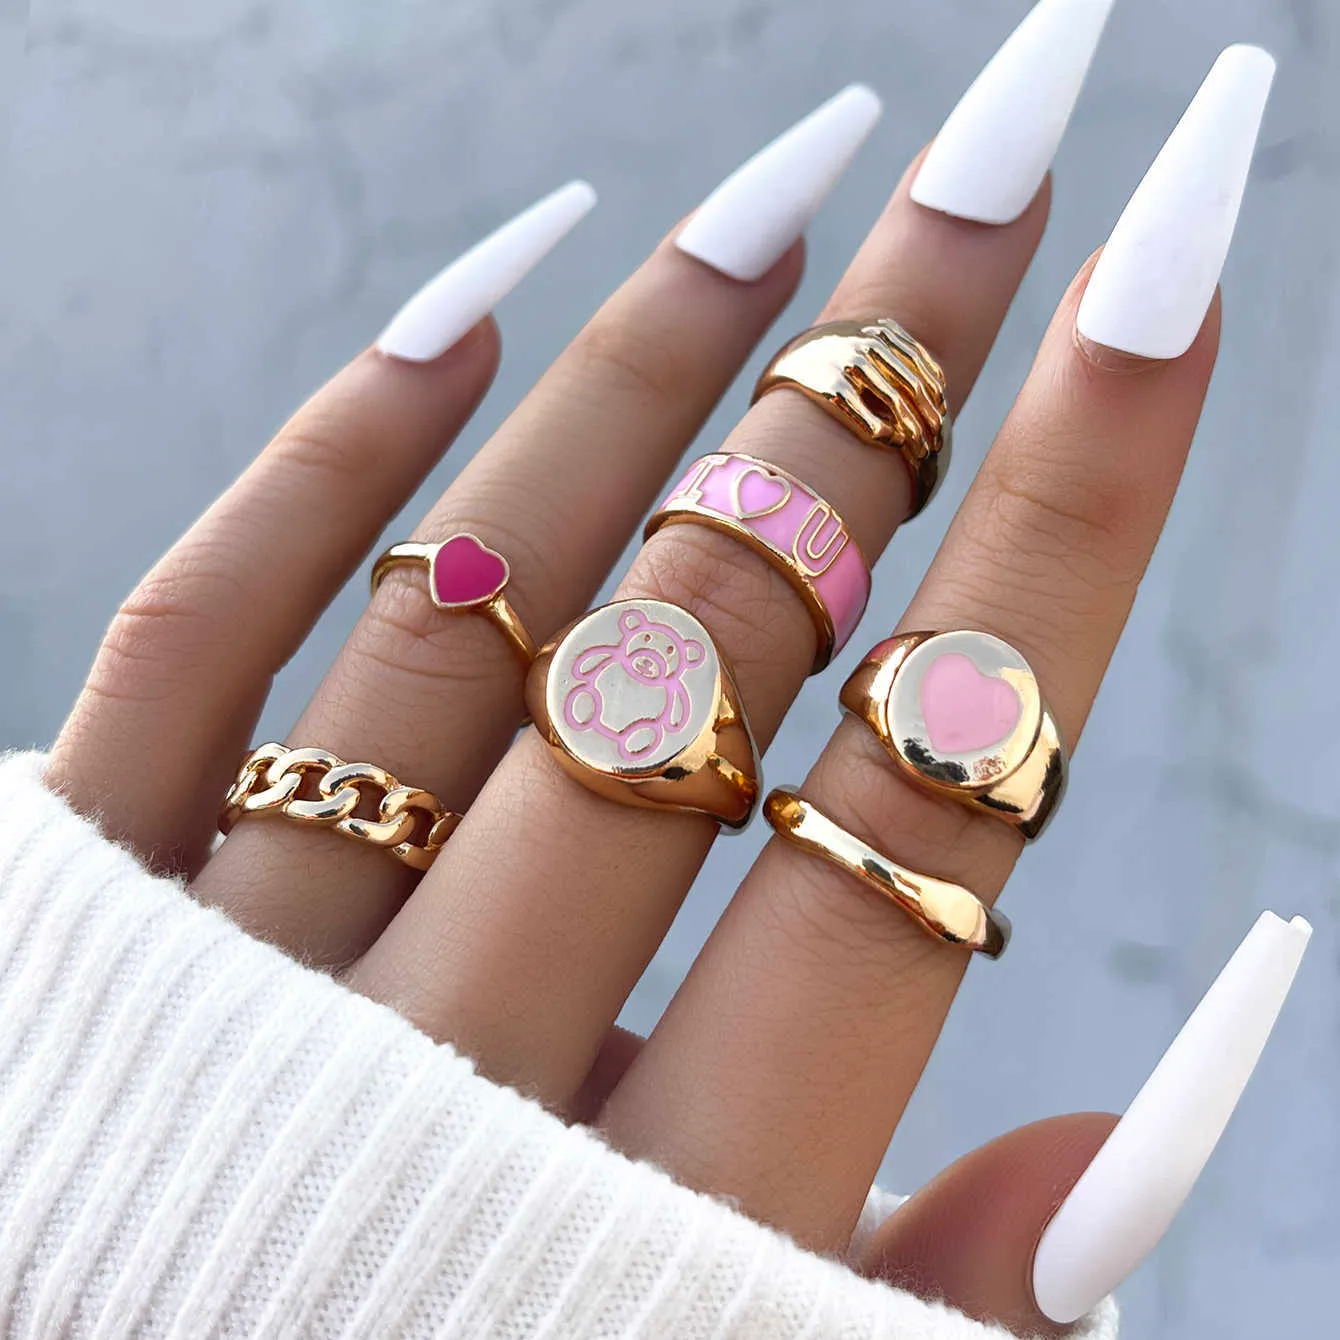 Band Rings Aprilwell 7Pcs Kpop Cute Bear Gold Matching Rings for Women Aesthetic Pink Heart E girl Y2k Fashion Jewelry Gifts Anillos Mujer G230213